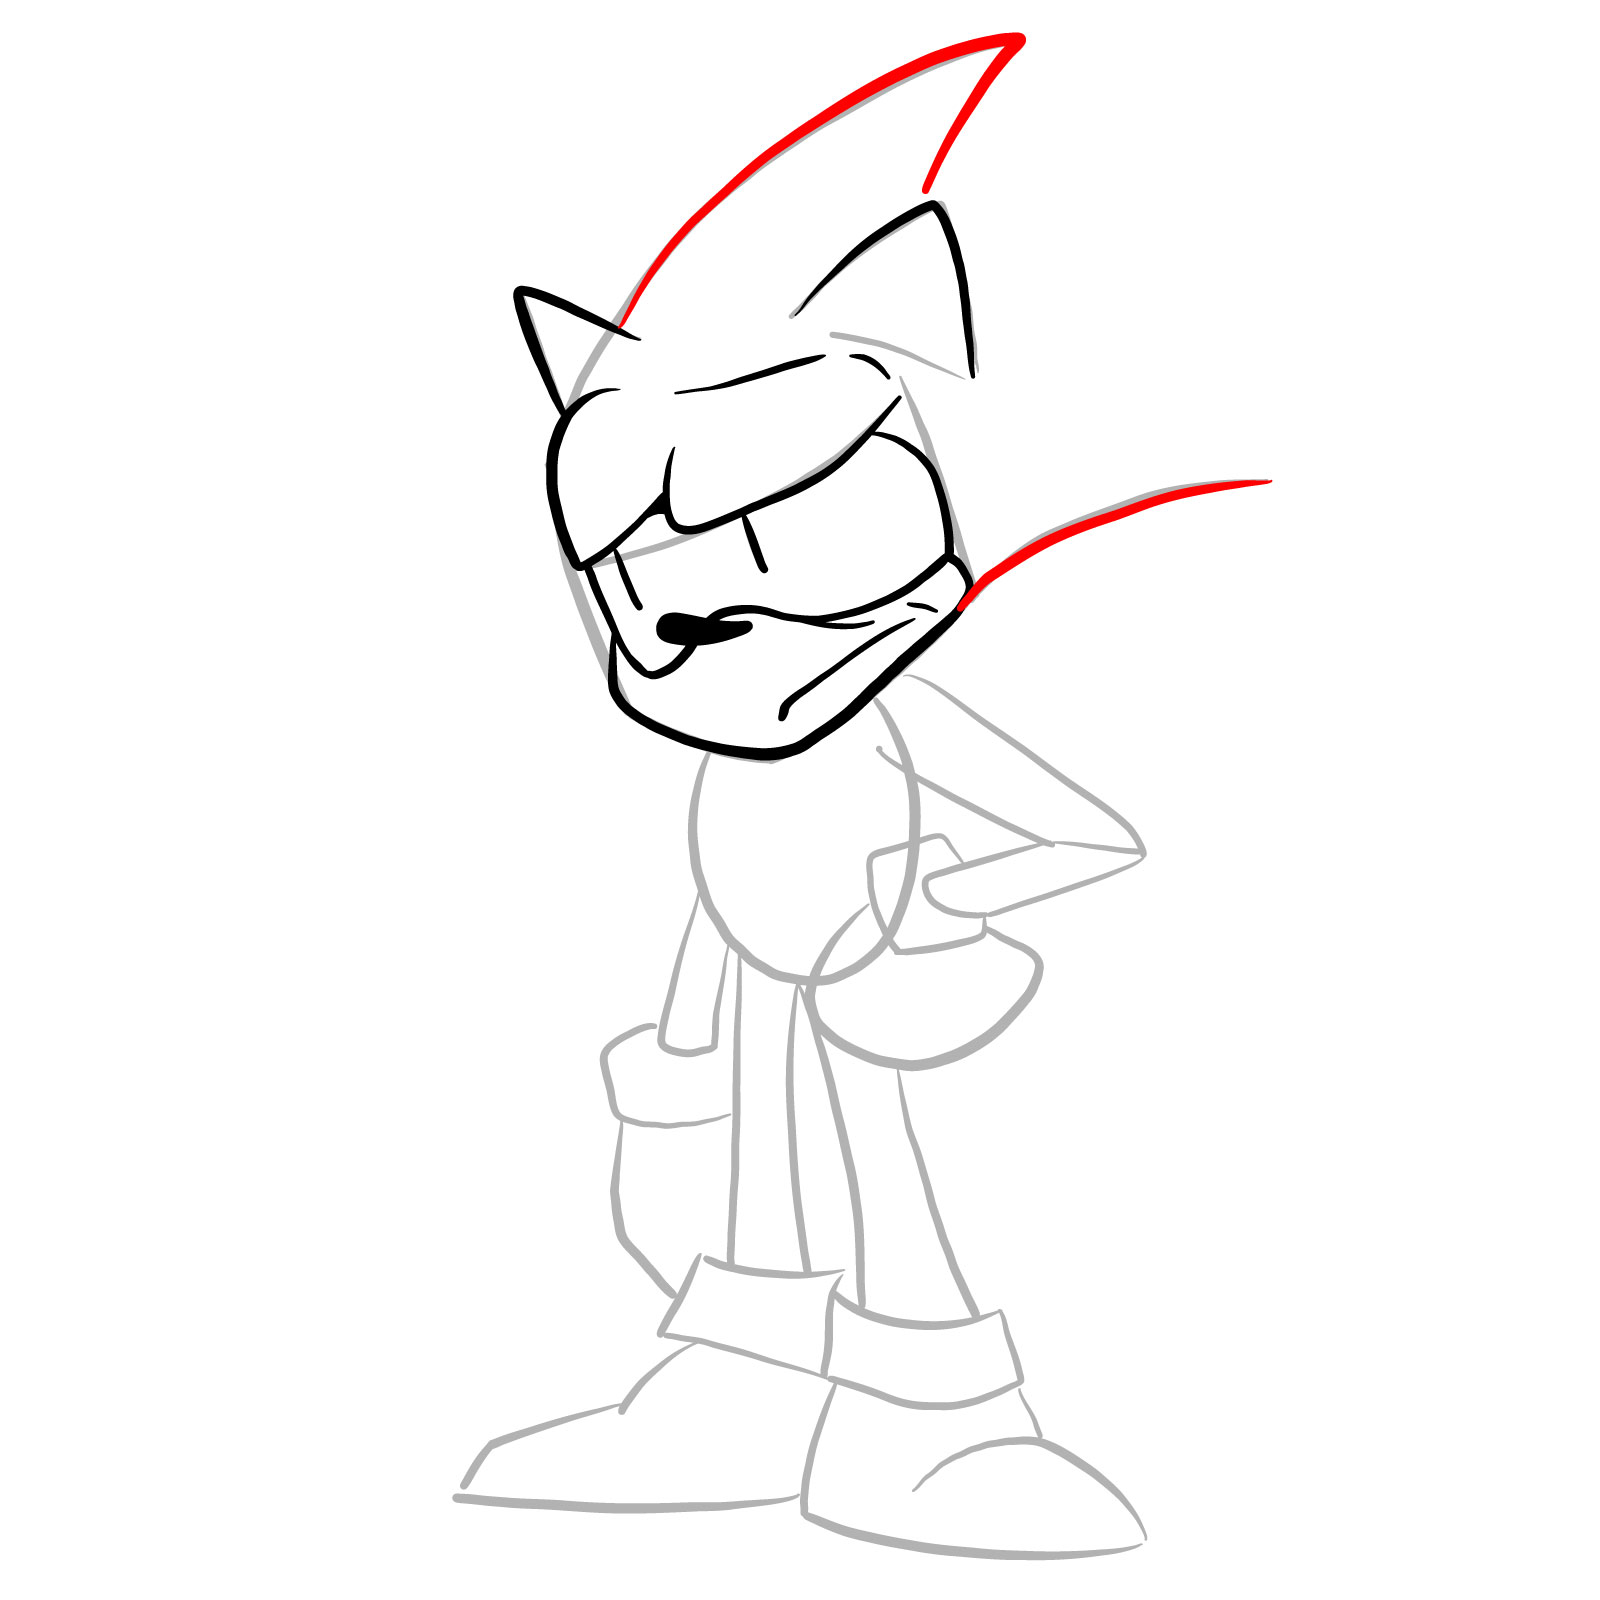 How to draw Sonic - FNF: Secret Histories - step 10